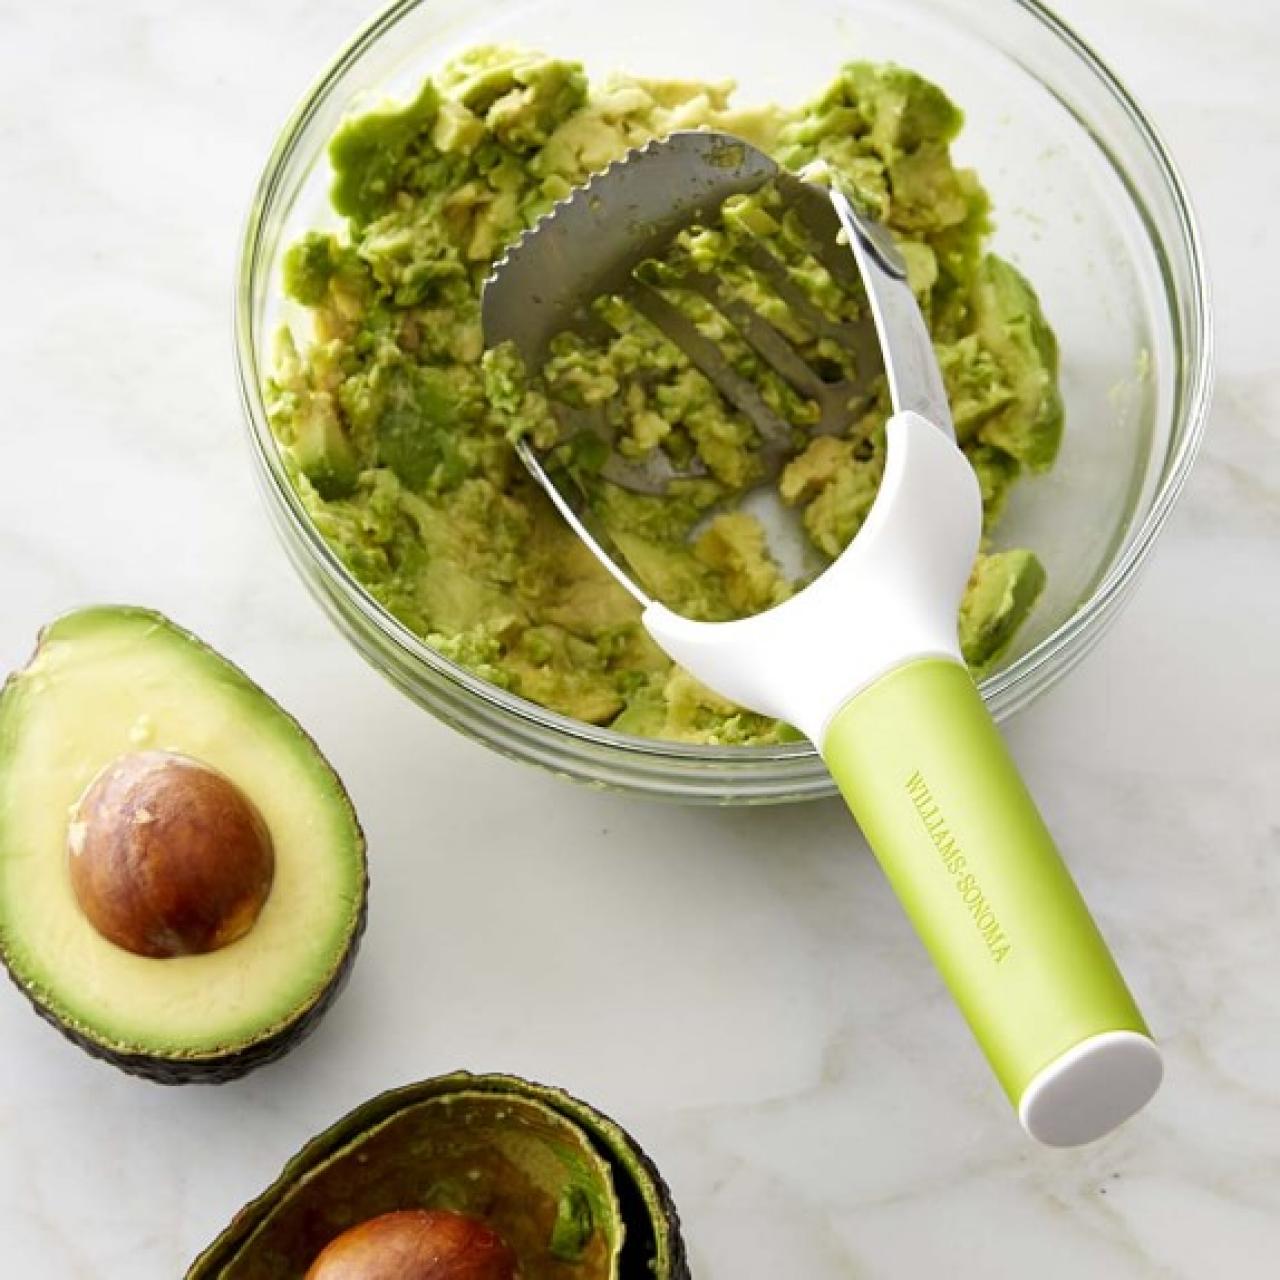 https://food.fnr.sndimg.com/content/dam/images/food/products/2019/1/25/rx_williams-sonoma-avocado-pitter--masher.jpeg.rend.hgtvcom.1280.1280.suffix/1548446426181.jpeg